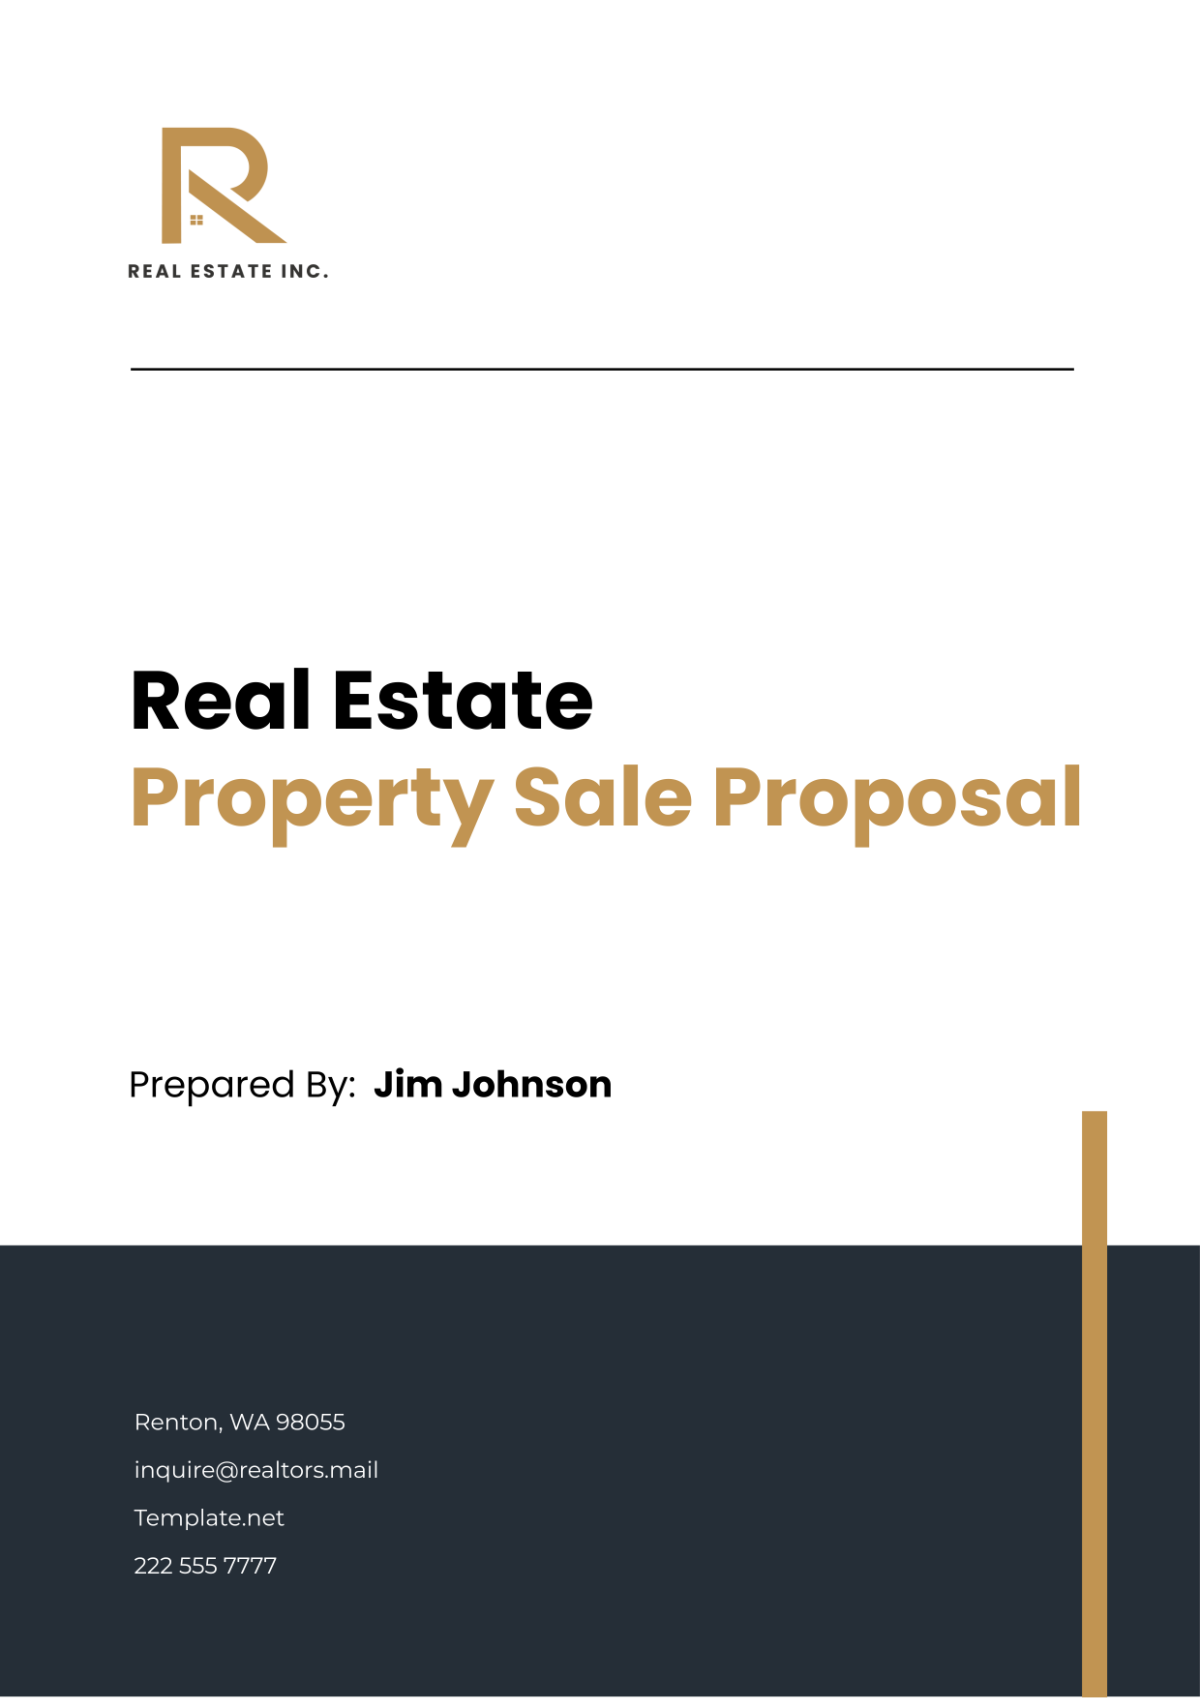 Free Real Estate Property Sale Proposal Template